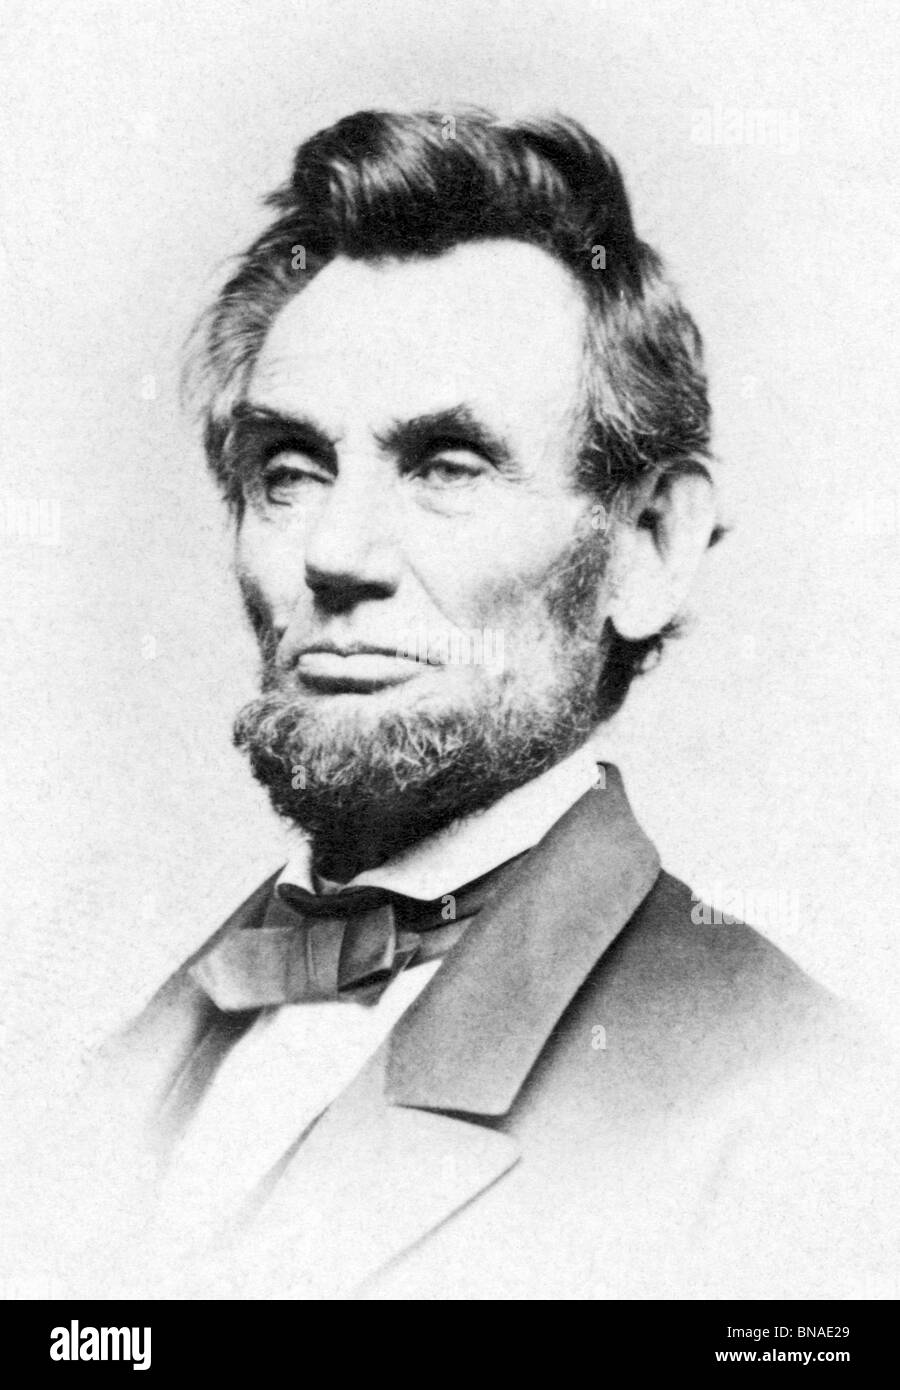 Portrait photo of Abraham Lincoln (1809 - 1865) - the 16th US President (1861 - 1865) and the first to be assassinated. Stock Photo